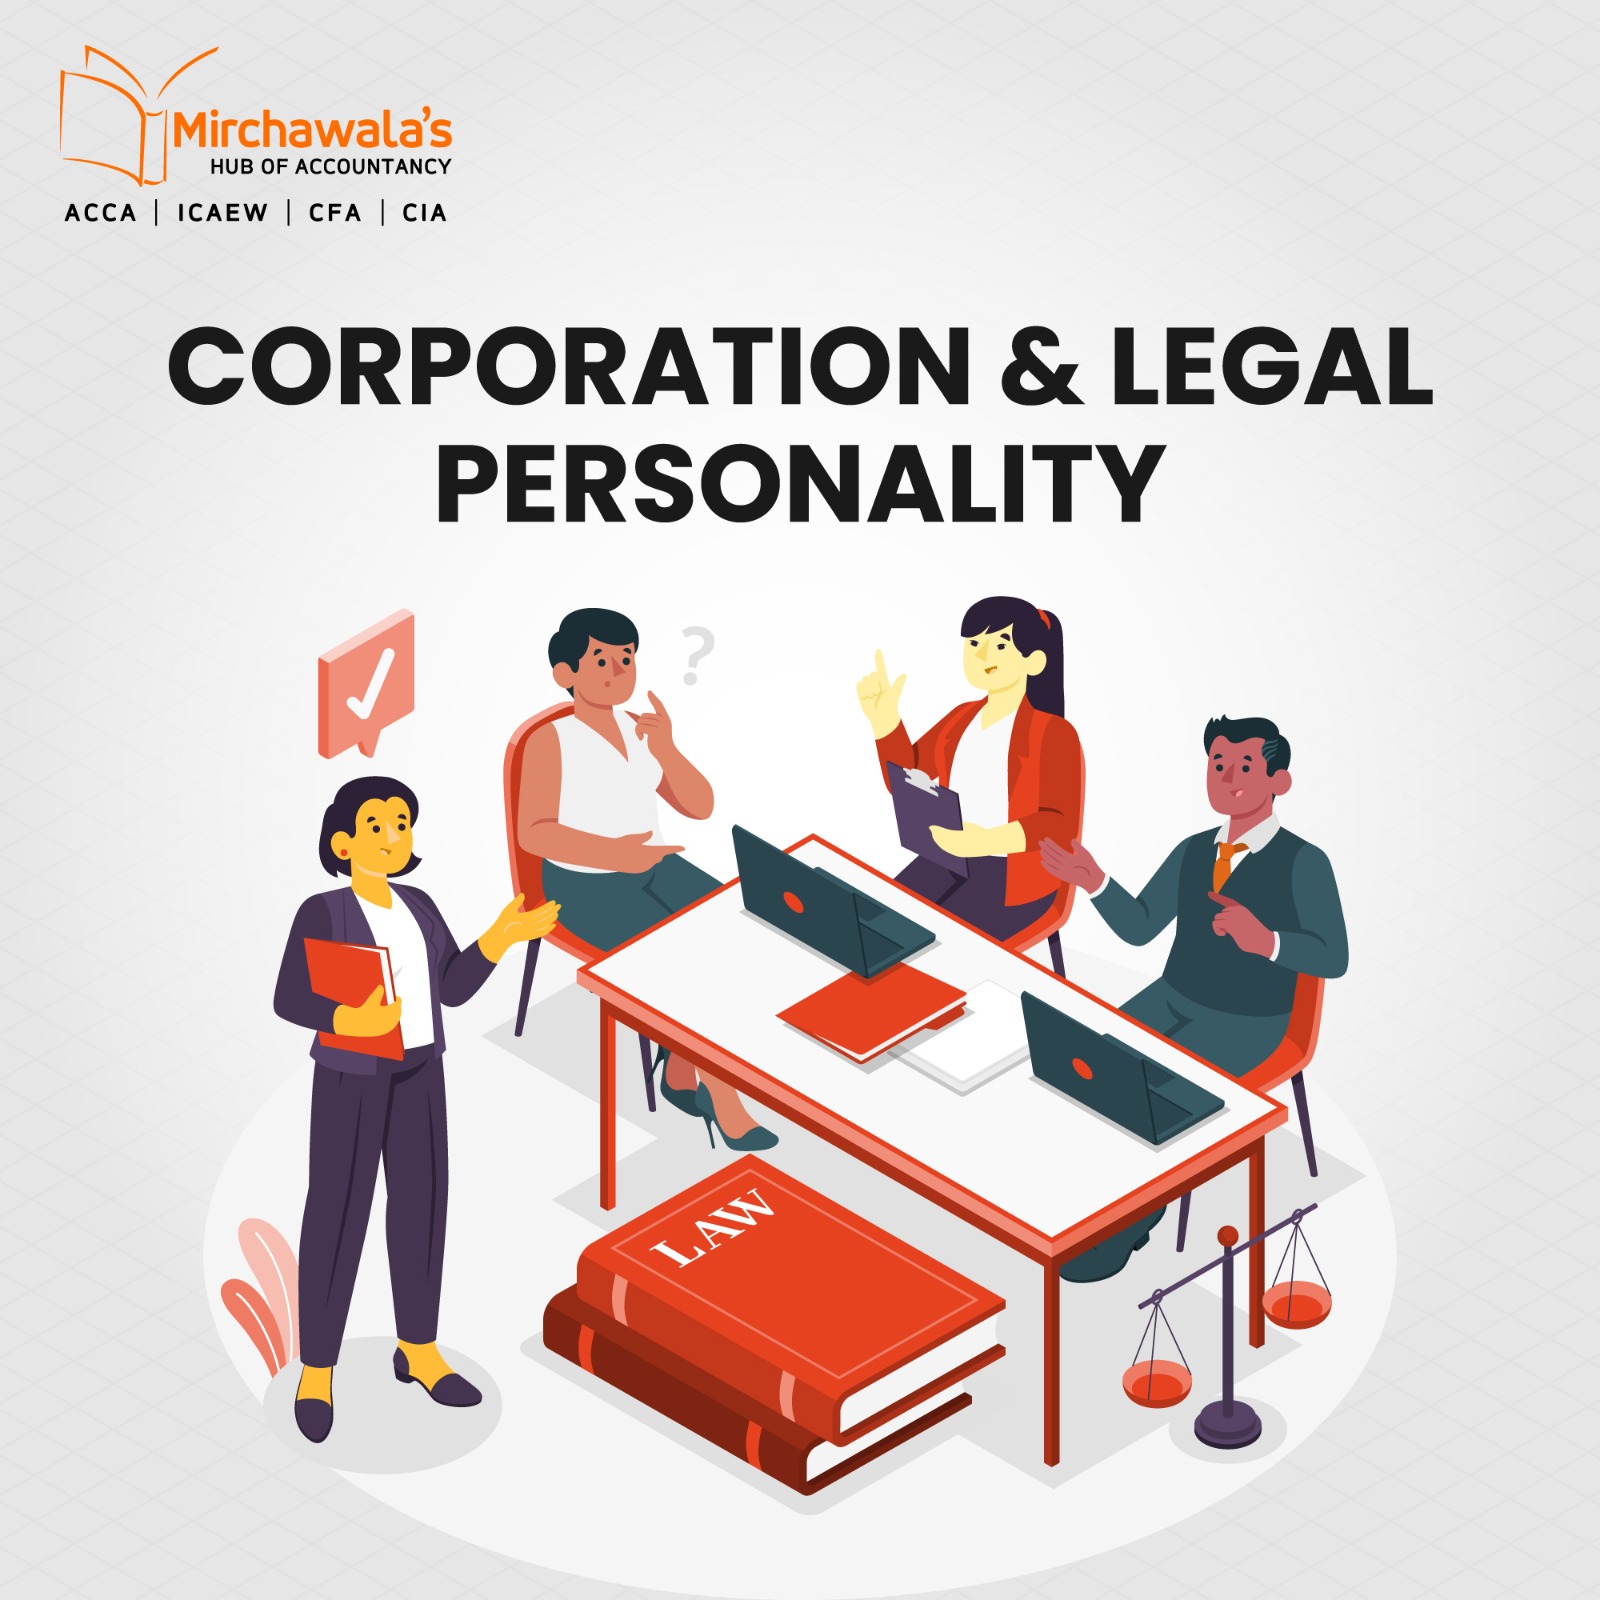 CORPORATION AND LEGAL PERSONALITY